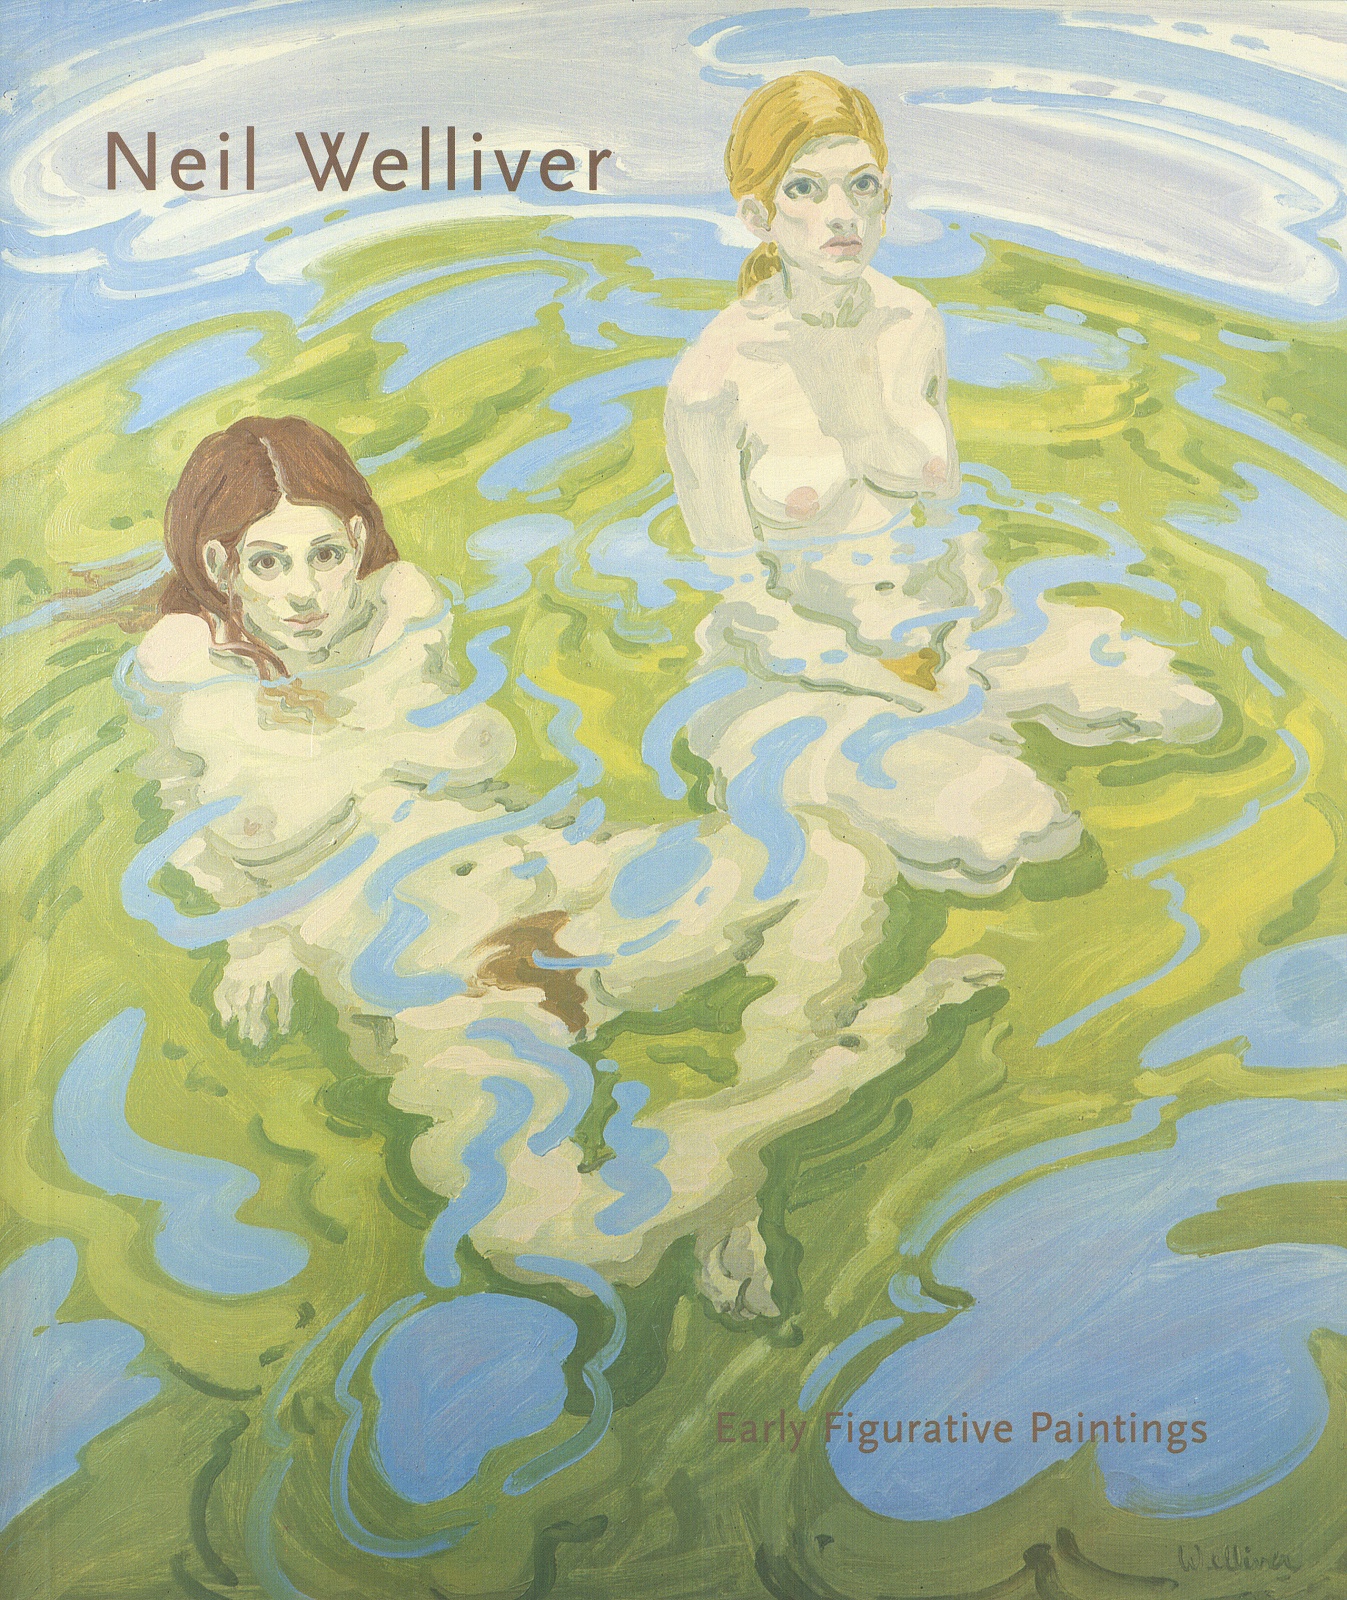 Early Figurative Paintings - Neil Welliver - Catalogues - Alexandre Gallery